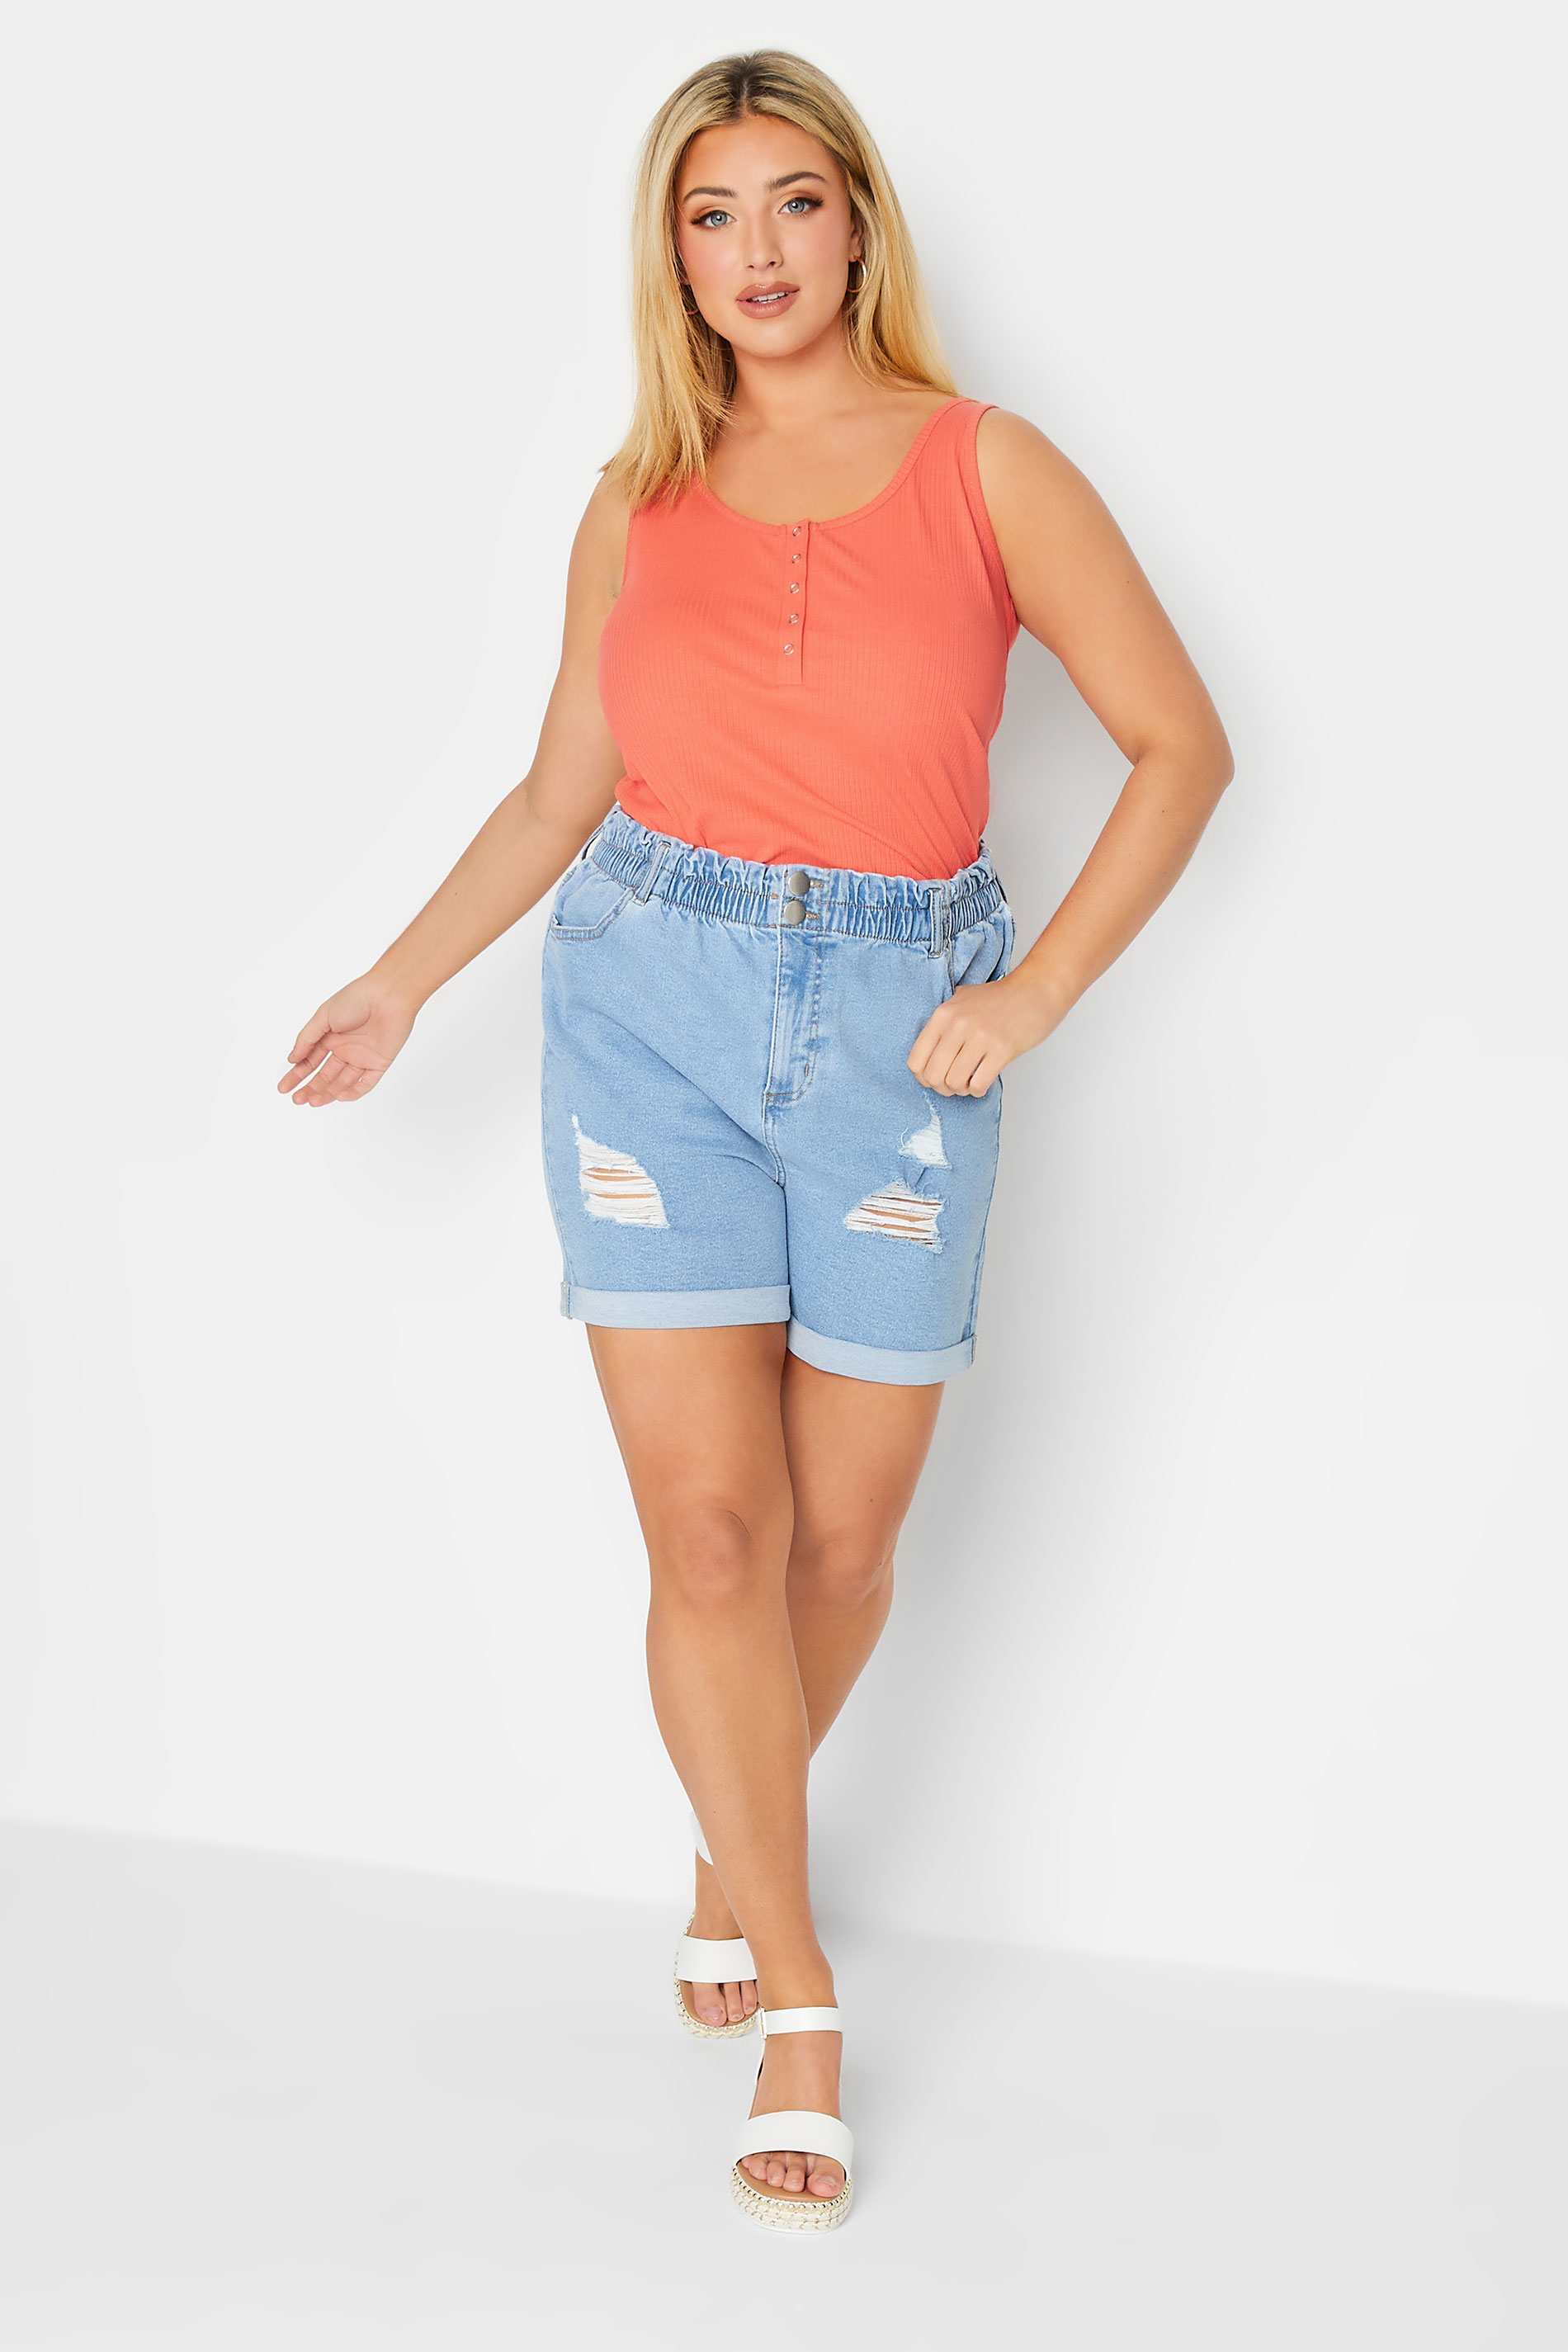 YOURS Plus Size Coral Orange Popper Vest Top | Yours Clothing 3